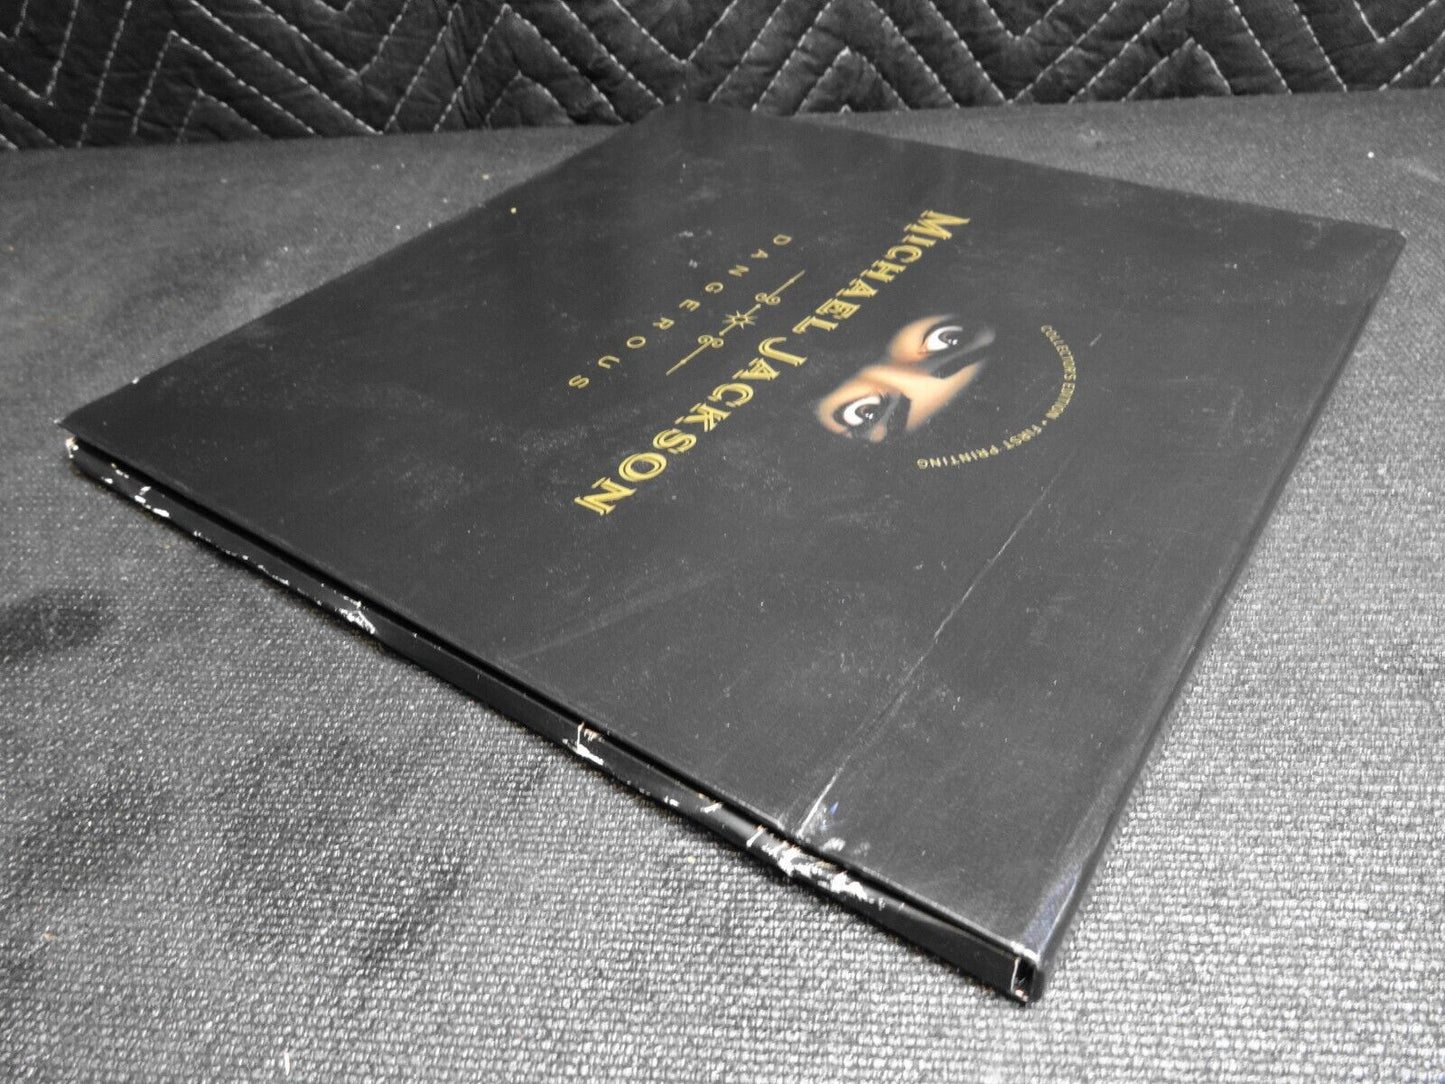 Michael Jackson Dangerous CD Collectors Edition First Printing Pop Up Cover 